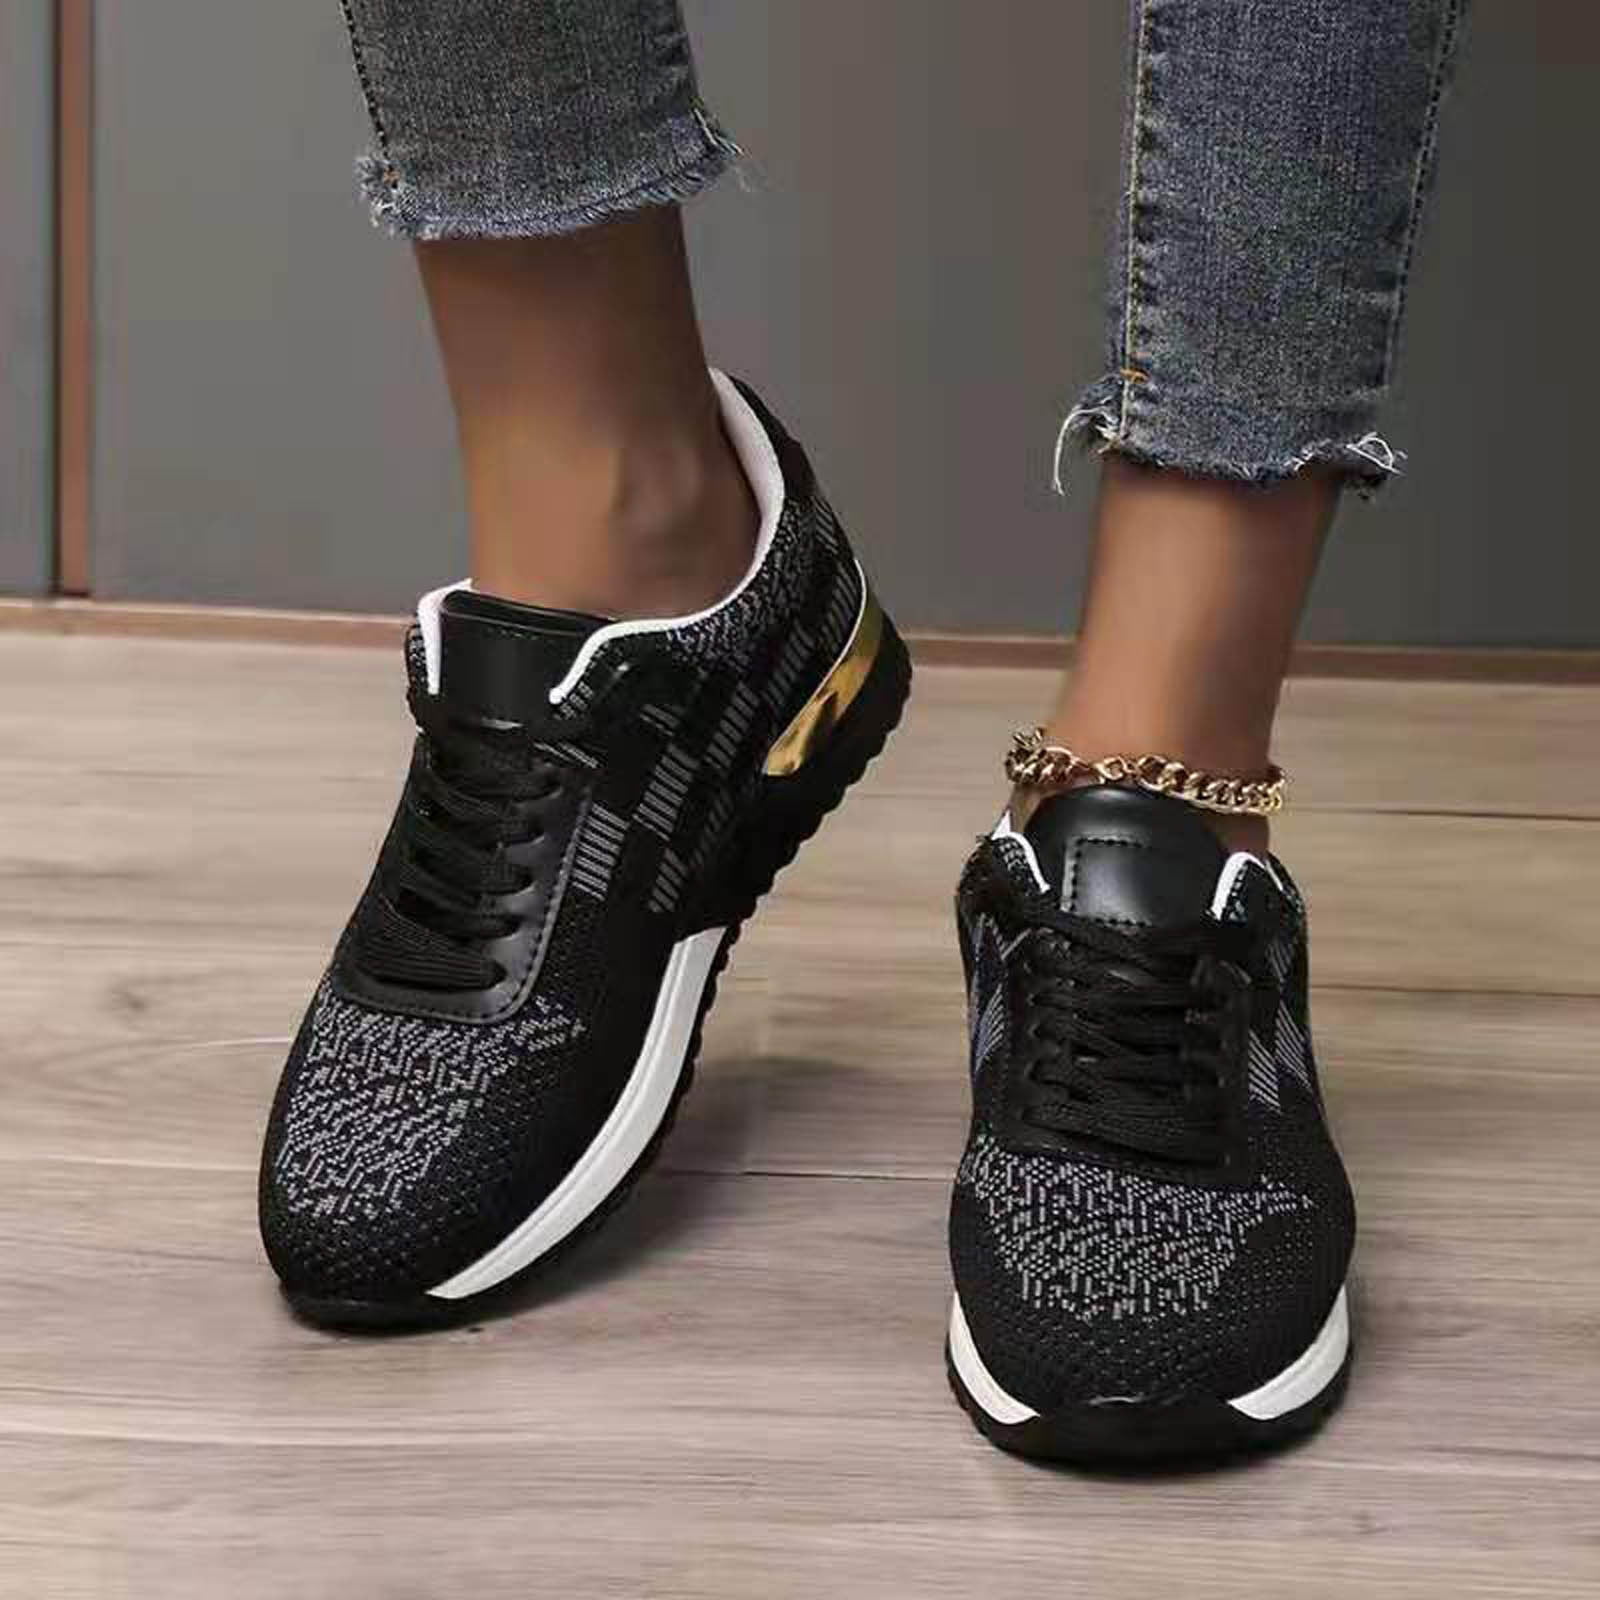 asdoklhq Women Sneakers Clearance Under $15,Autumn New Style Casual Plaid  Color Matching Women's Sports Wind Mesh Single Shoes 